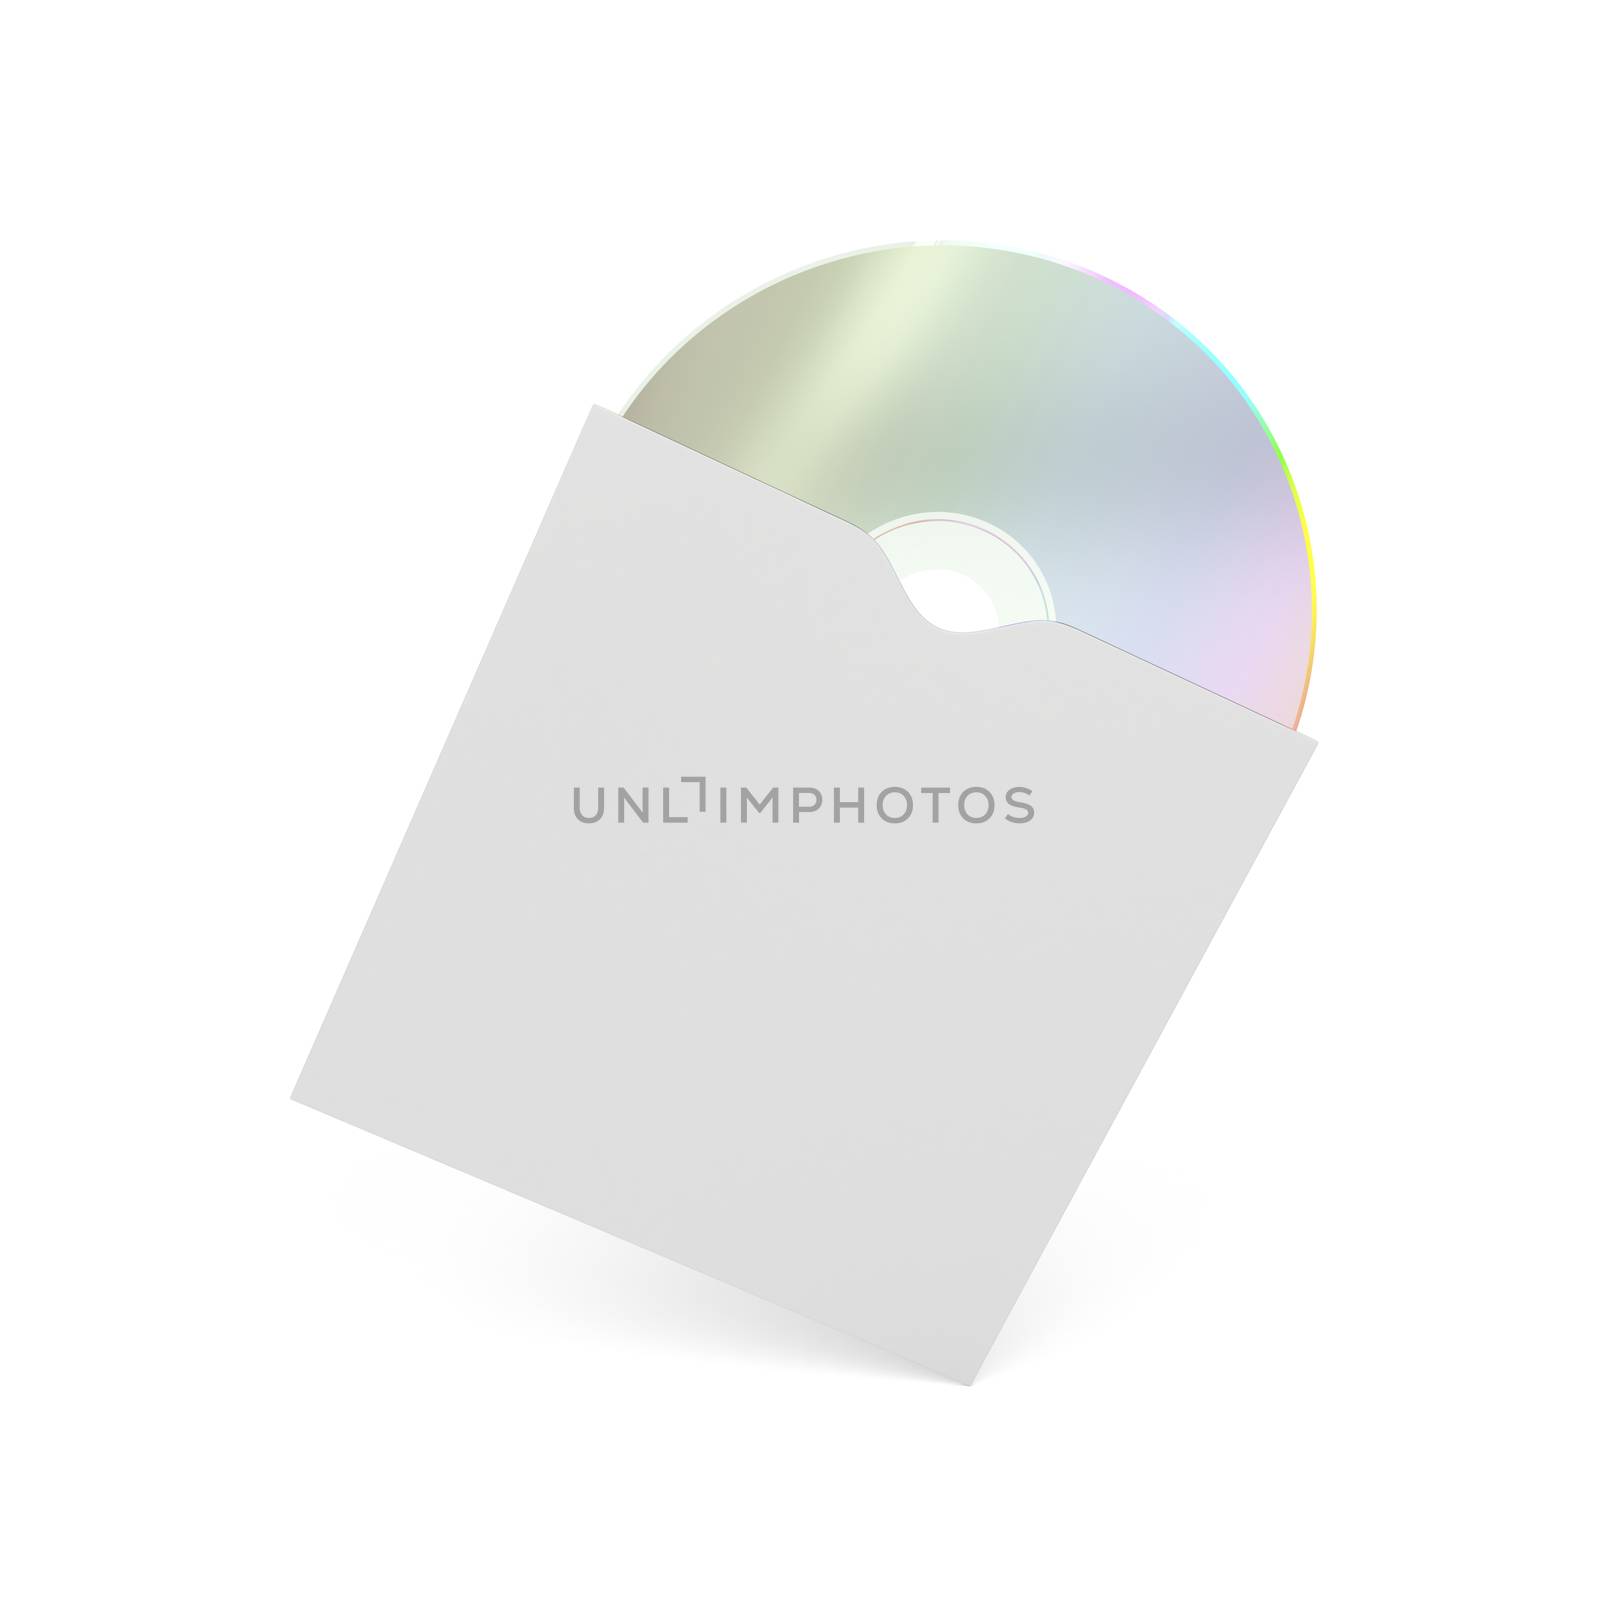 Compact disc in paper cover